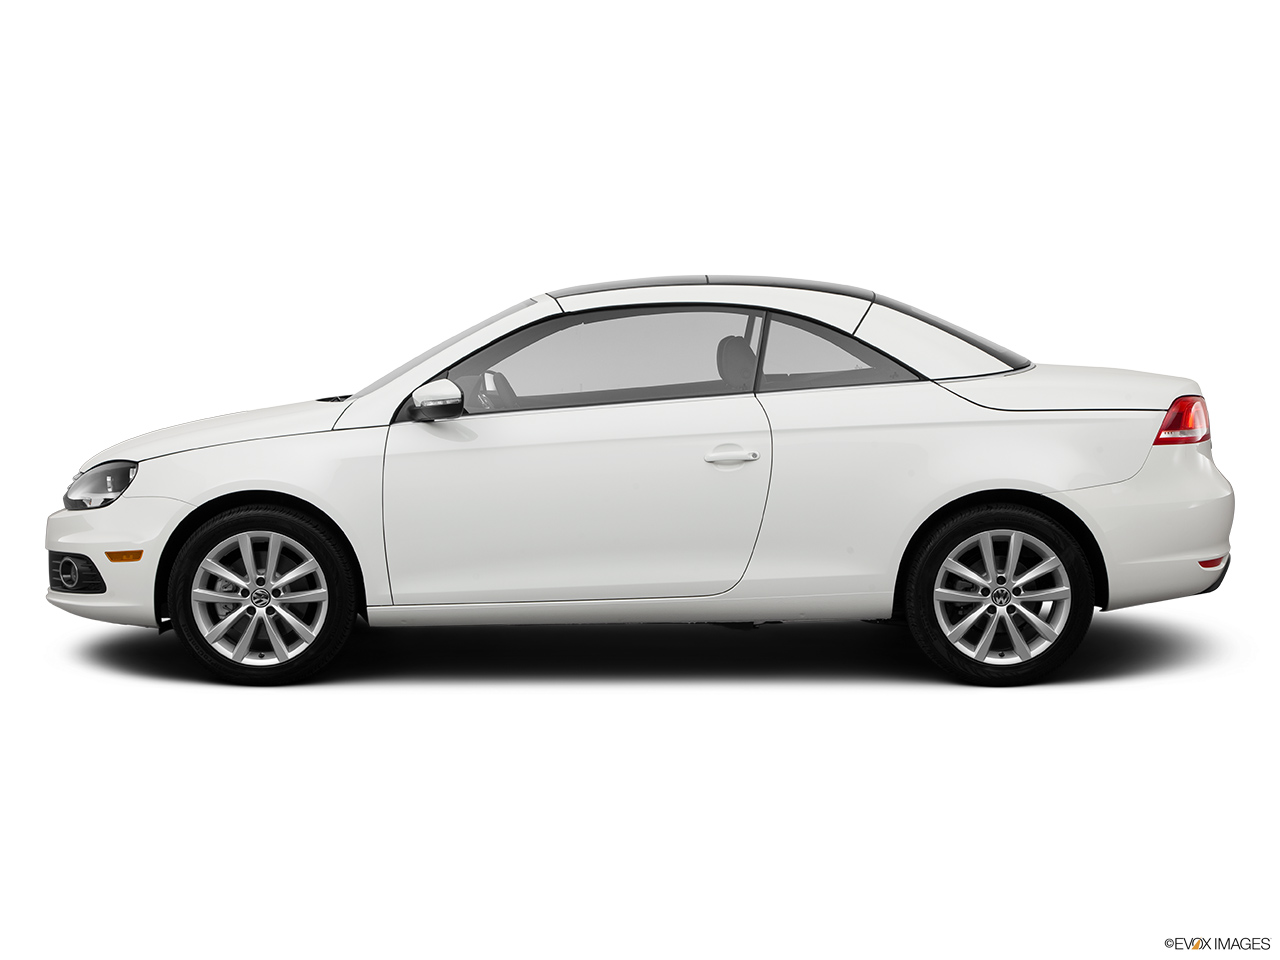 2014 Volkswagen Eos Komfort Drivers side profile, convertible top up (convertibles only). 